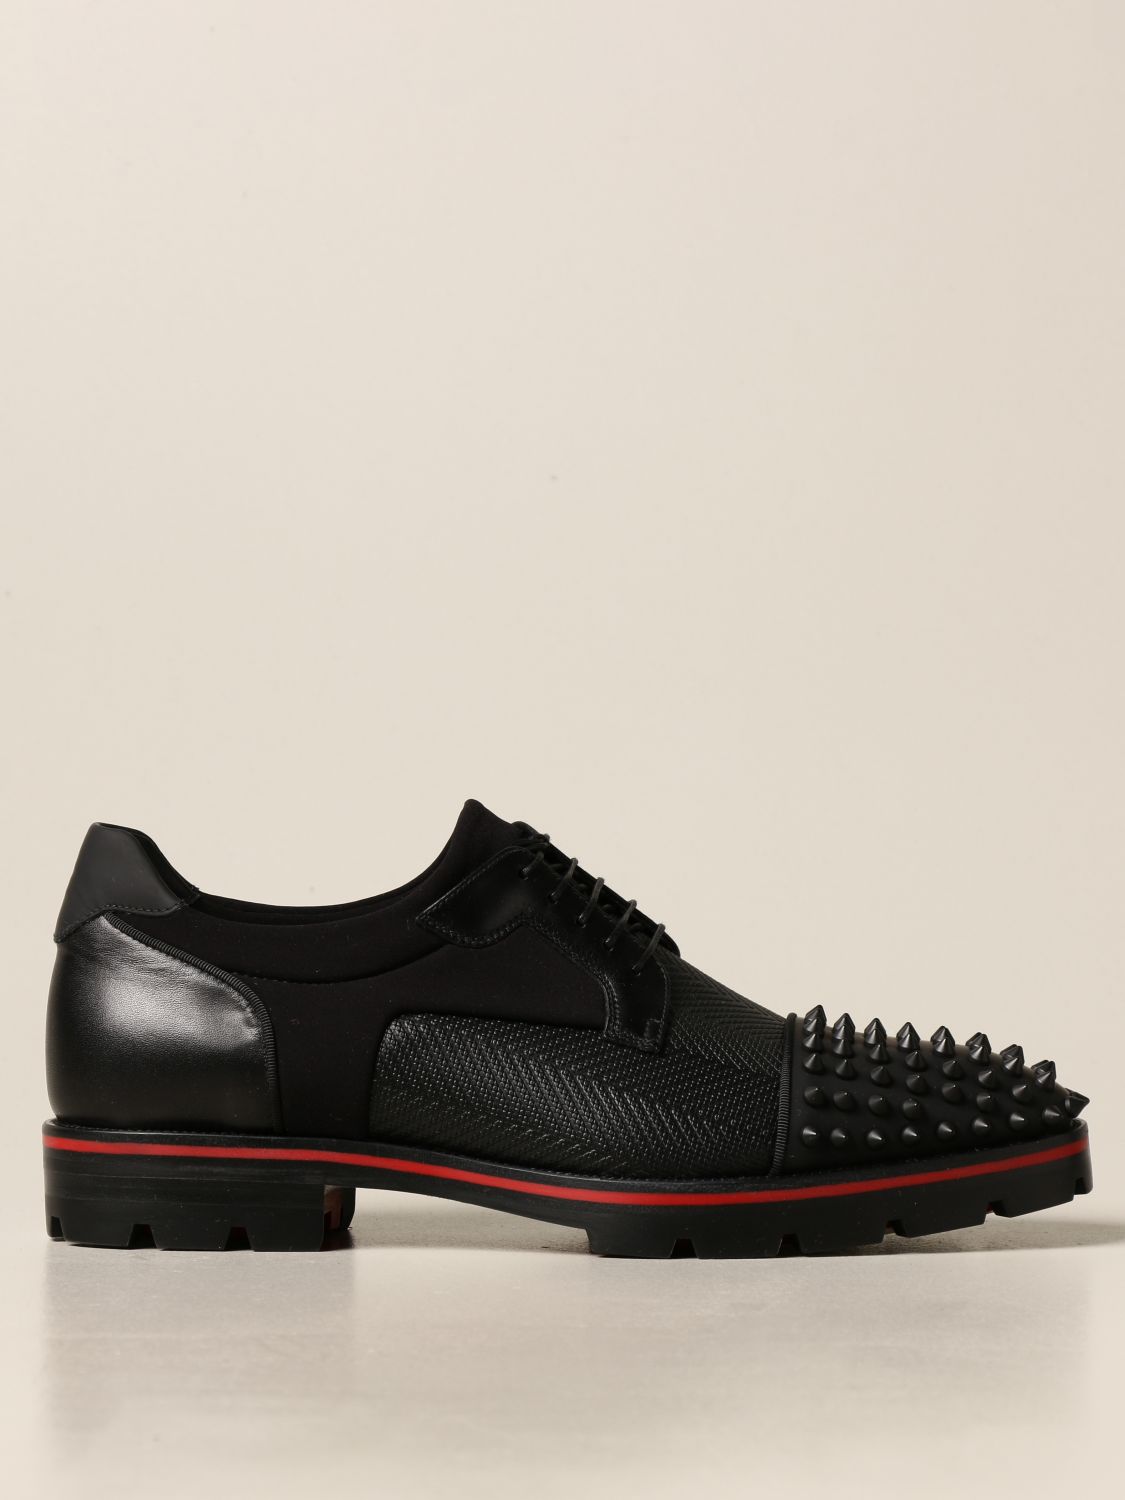 Luis Christian Louboutin shoe in leather with studs